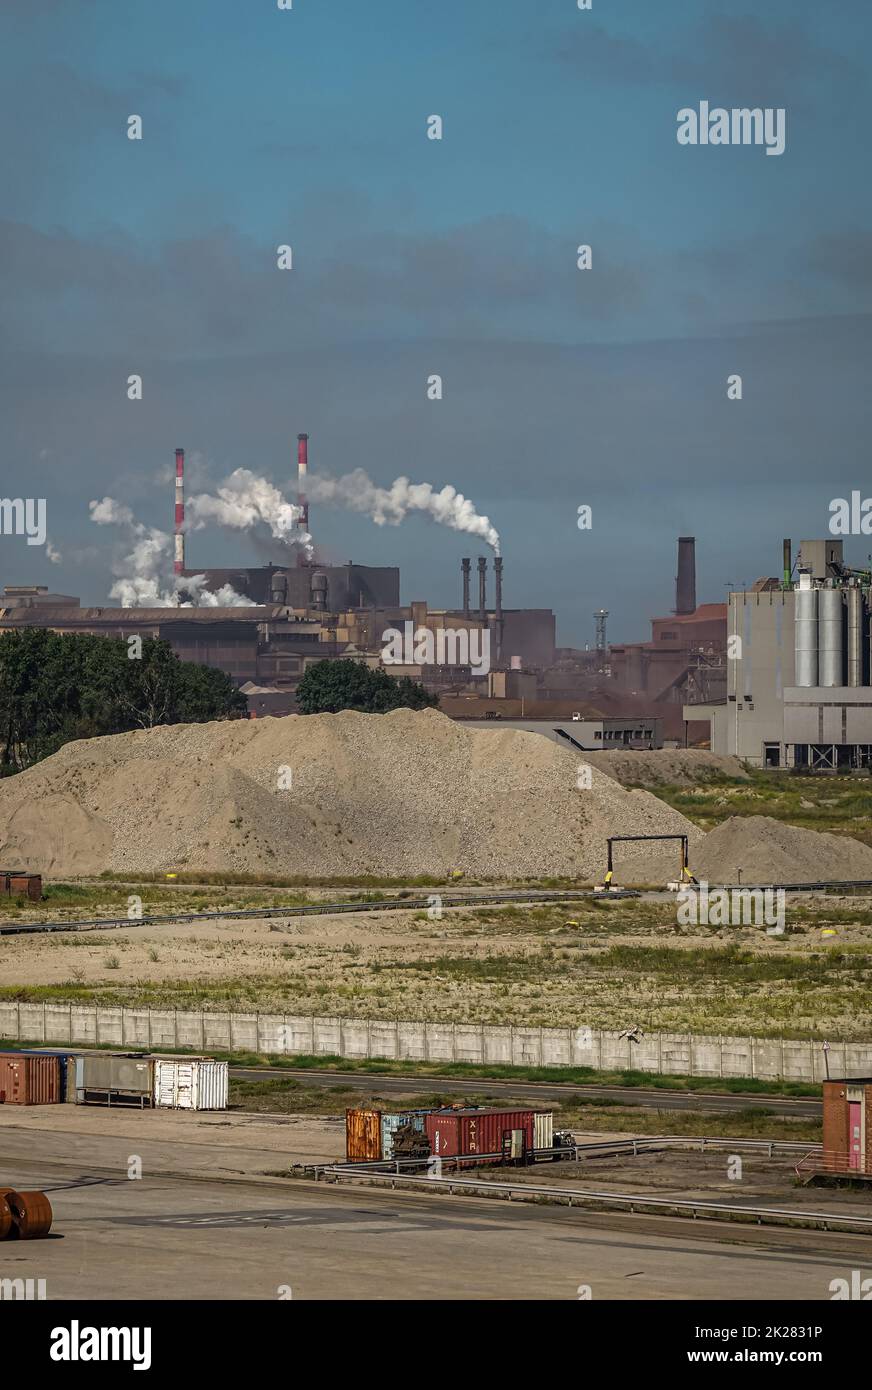 Europe, France, Dunkerque - July 9, 2022: Port scenery. Chimneys blow smoke over large power generation plant under smokey sky. Other port scenery up Stock Photo